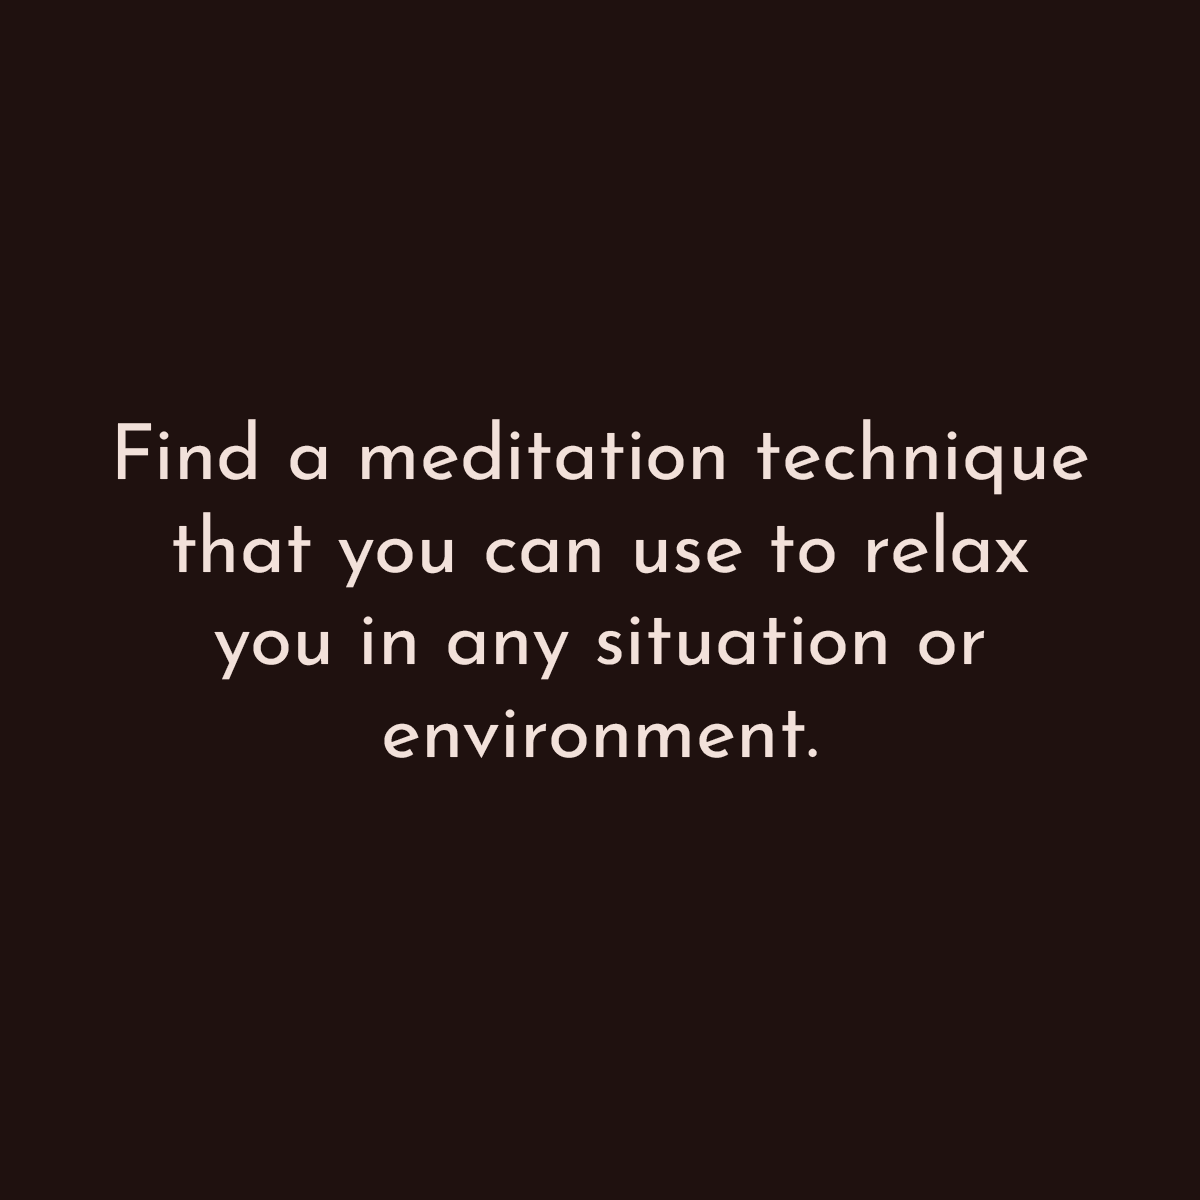 Find a meditation technique that you can use to relax you in any situation or environment.